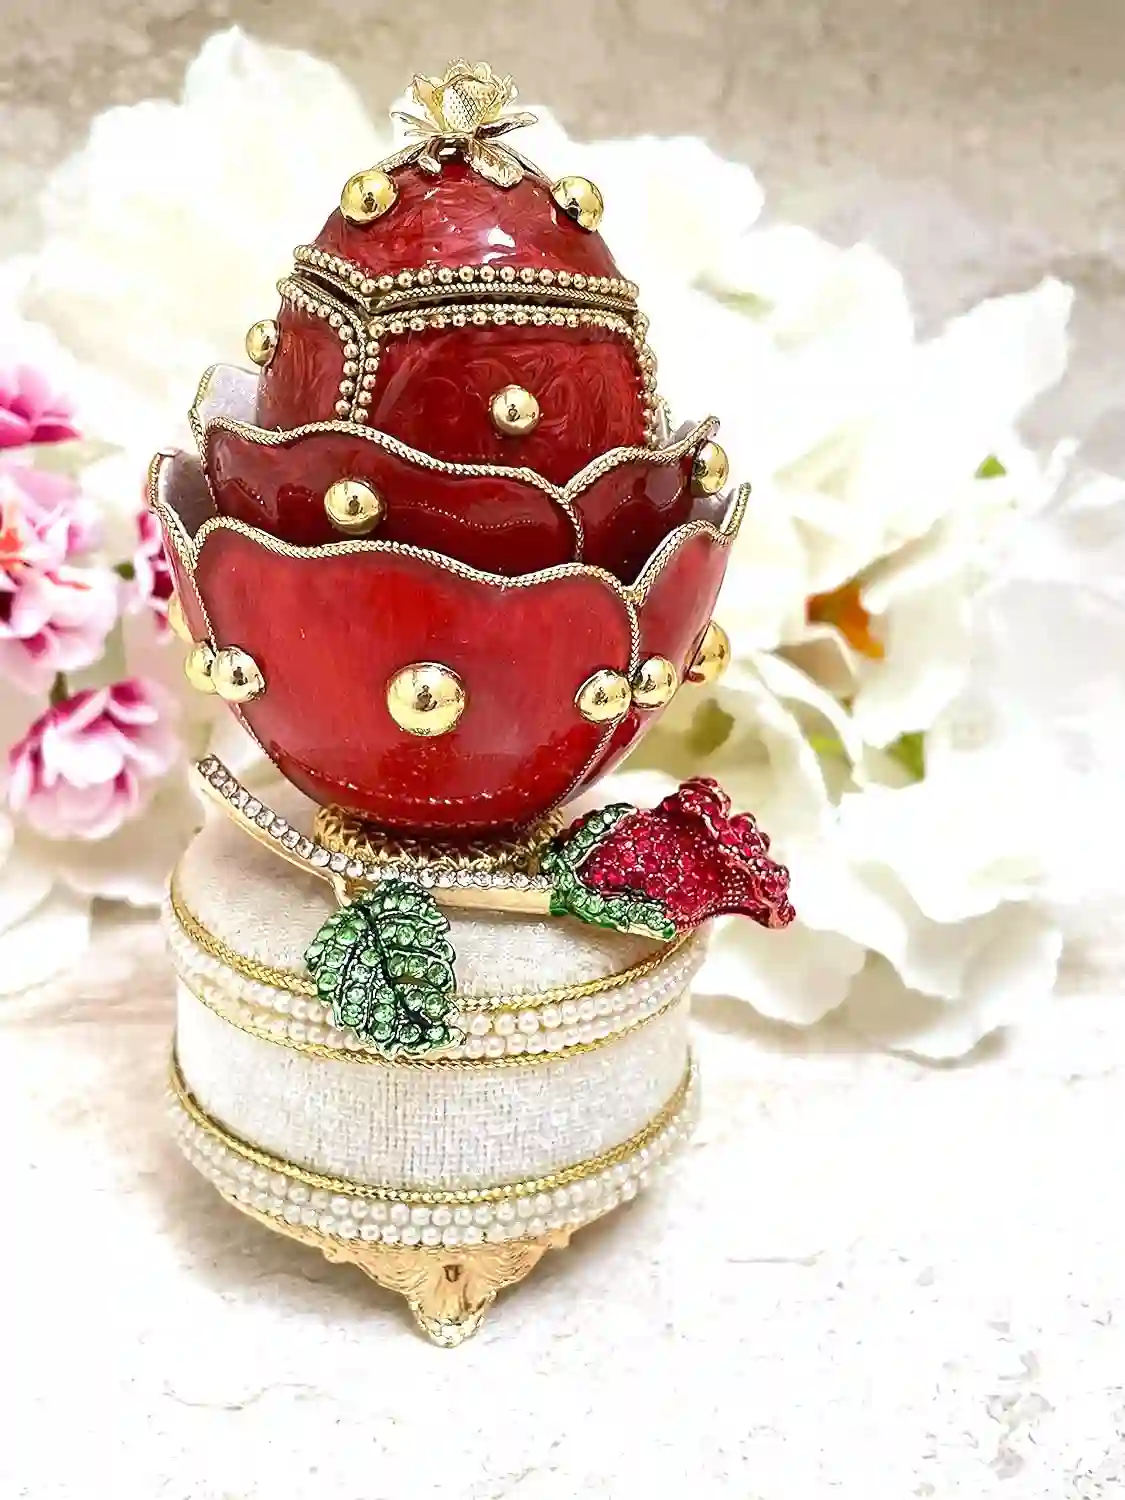 ONE of a Kind Faberge egg 2002 Ruby Rose Faberge Style Egg HANDCARVED Faberge egg MUSIC Box & Jewelry First Christmas Anniversary New Year 